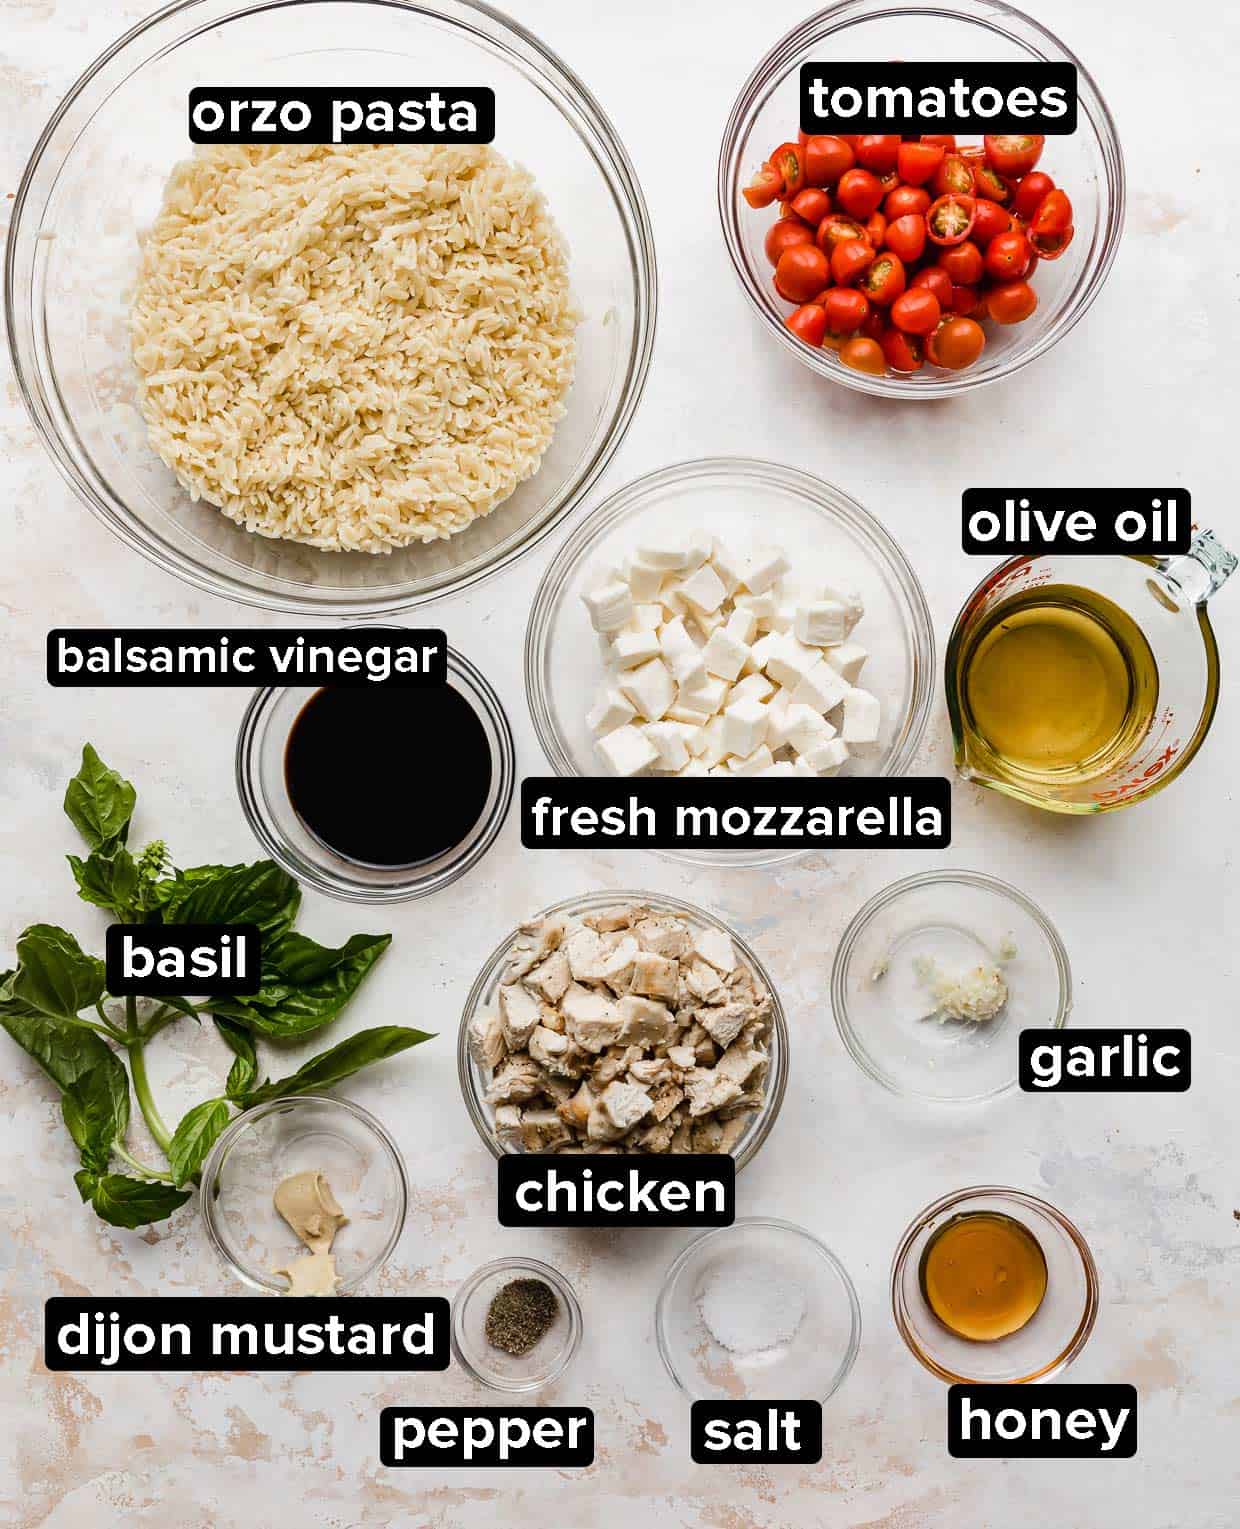 Orzo caprese salad ingredients on a white background.